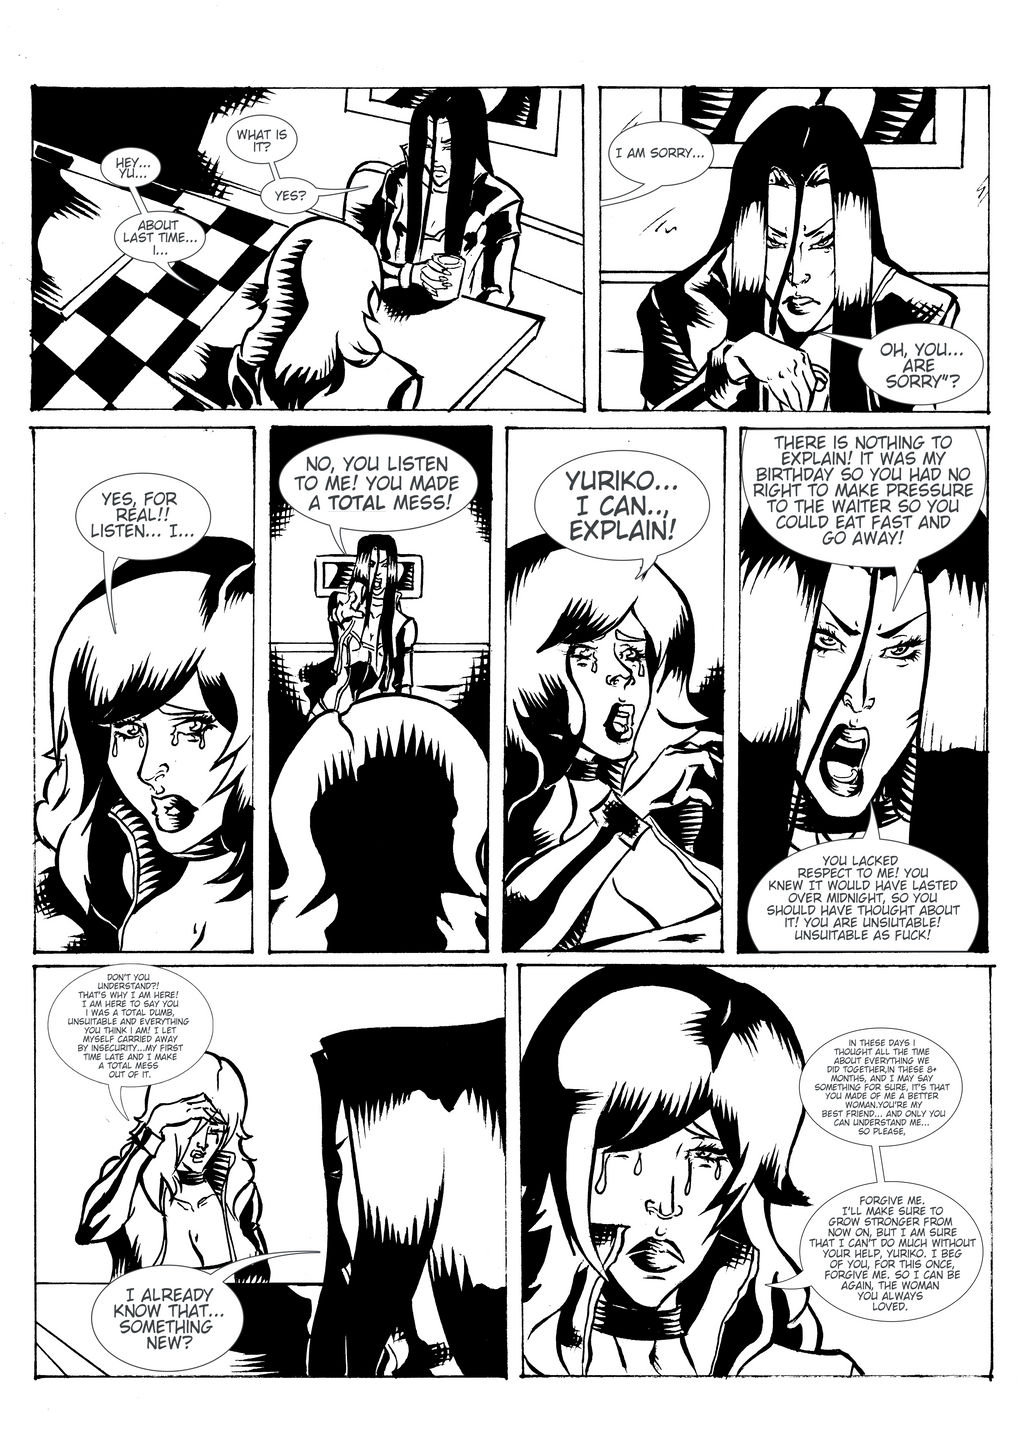 Comic Book Page - Inking (1)